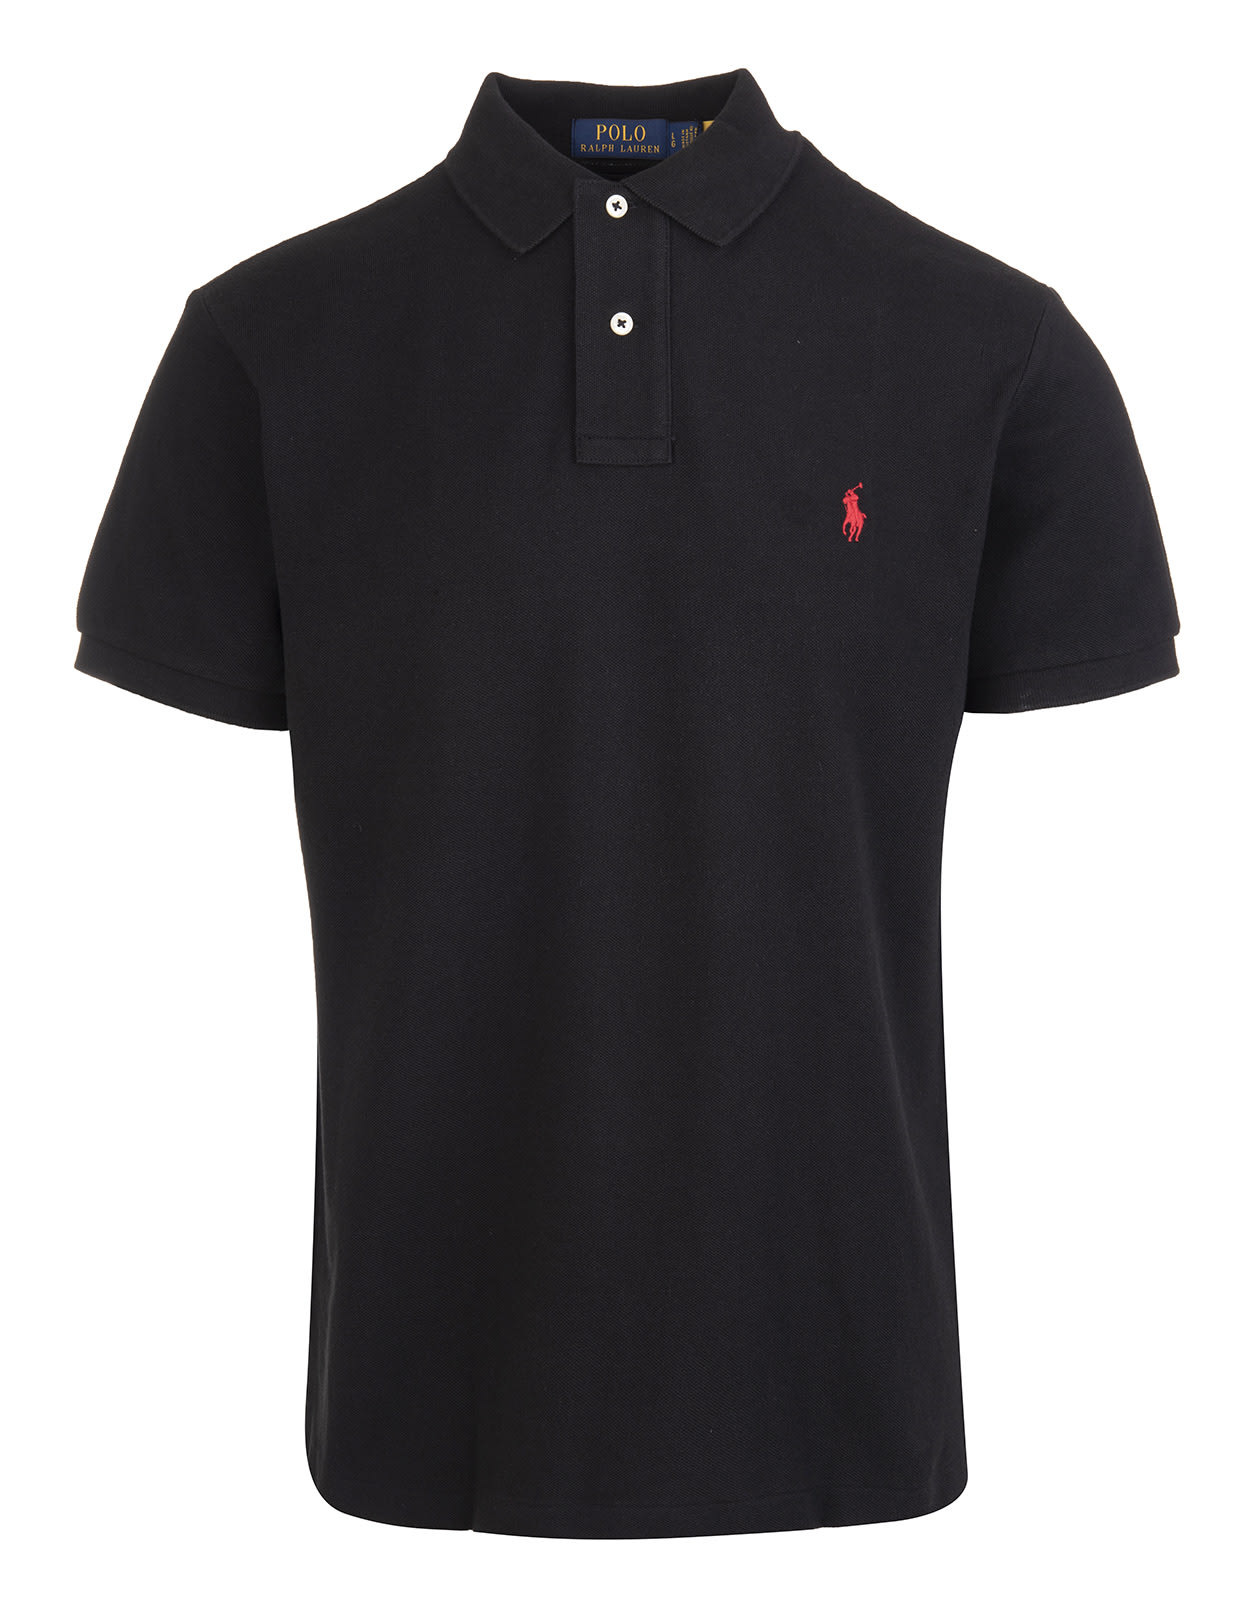 RALPH LAUREN MAN BLACK AND RED SLIM-FIT PIQUE POLO SHIRT,710-795080 006